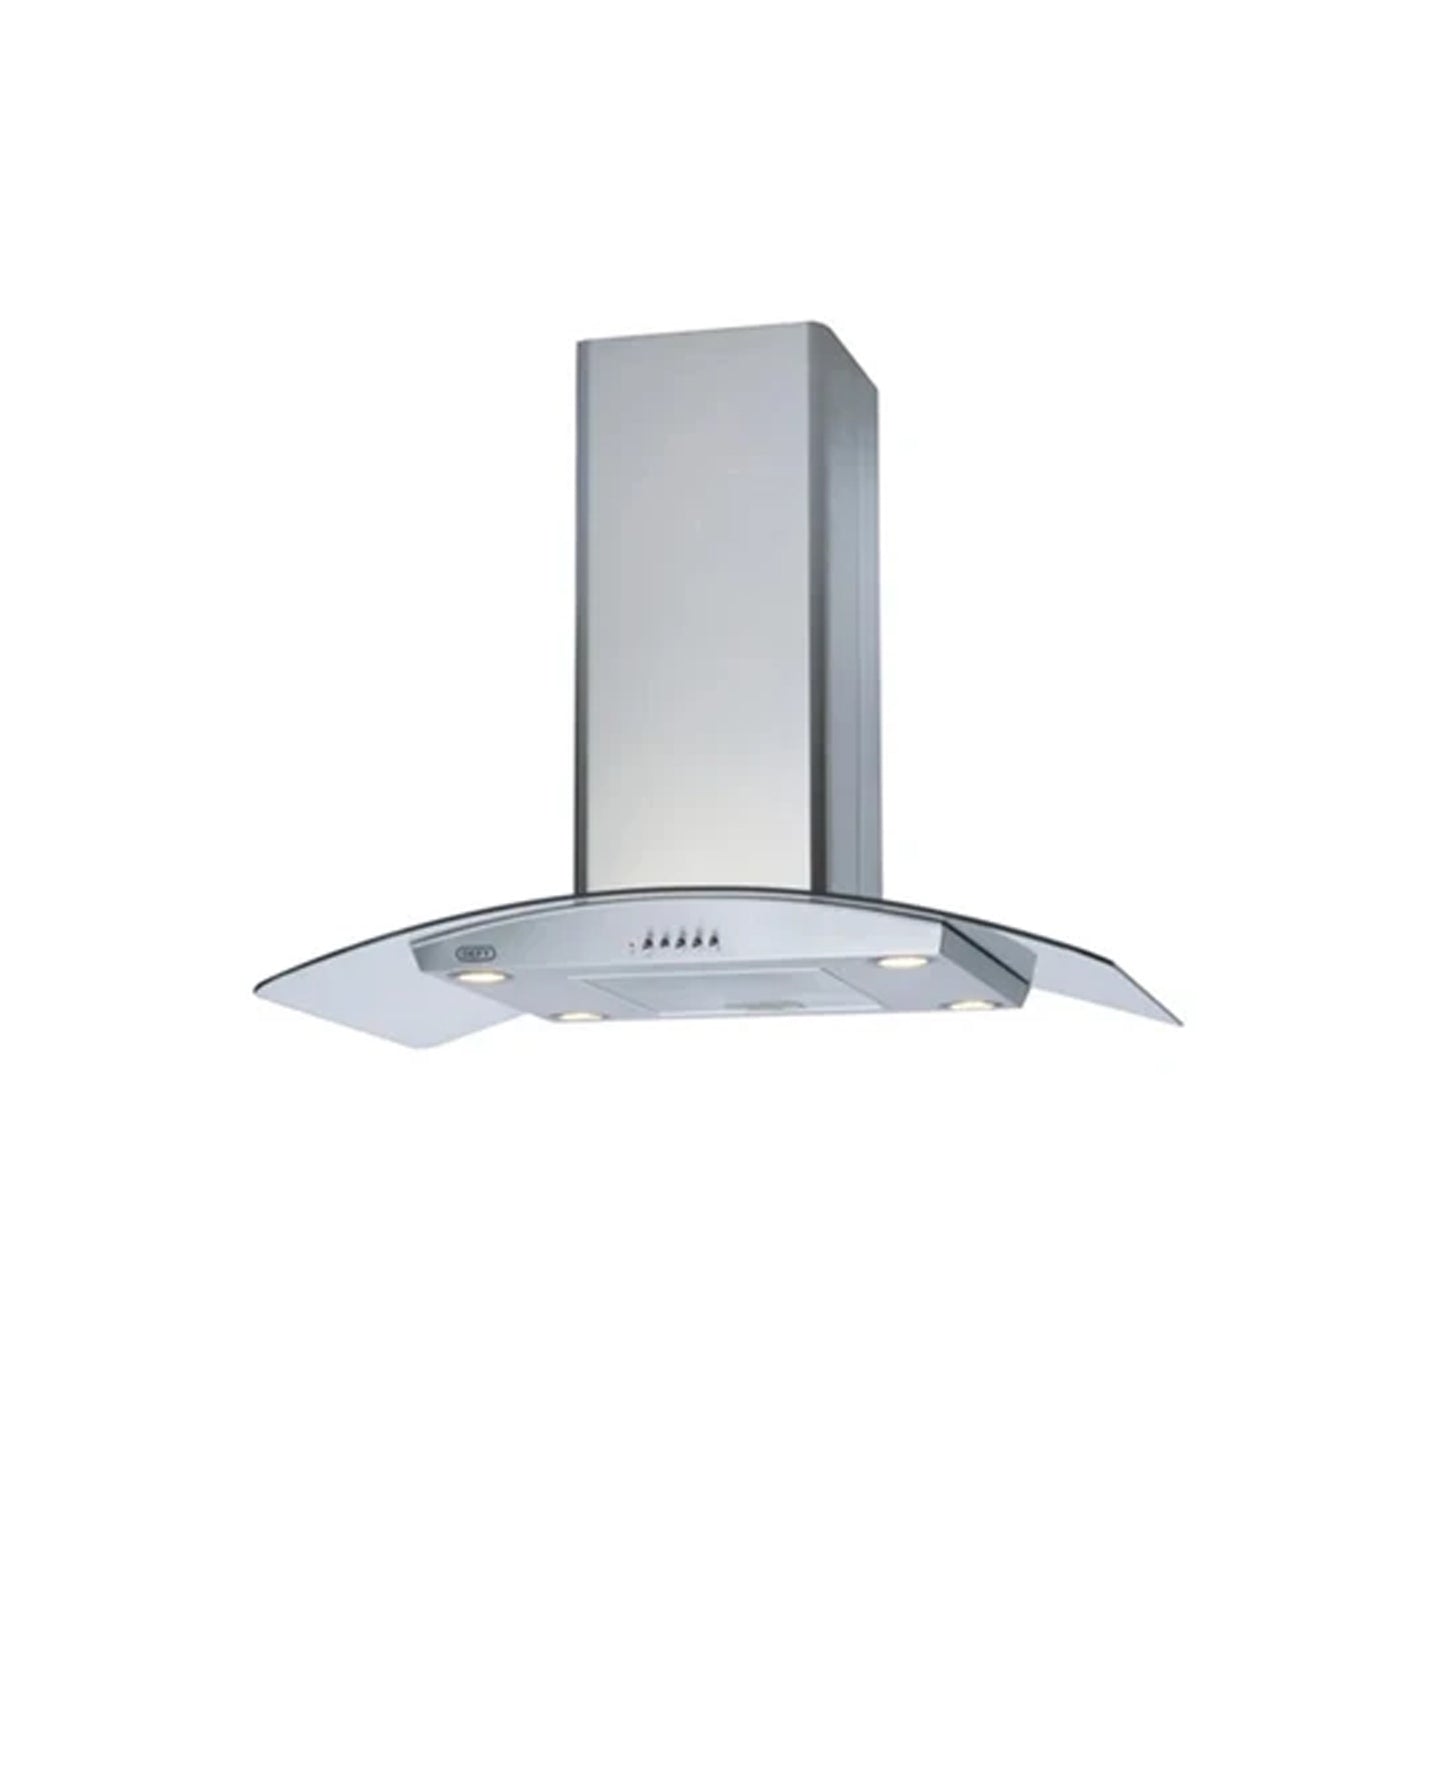 Defy Curved CookerHood Stainless Steel DCH323